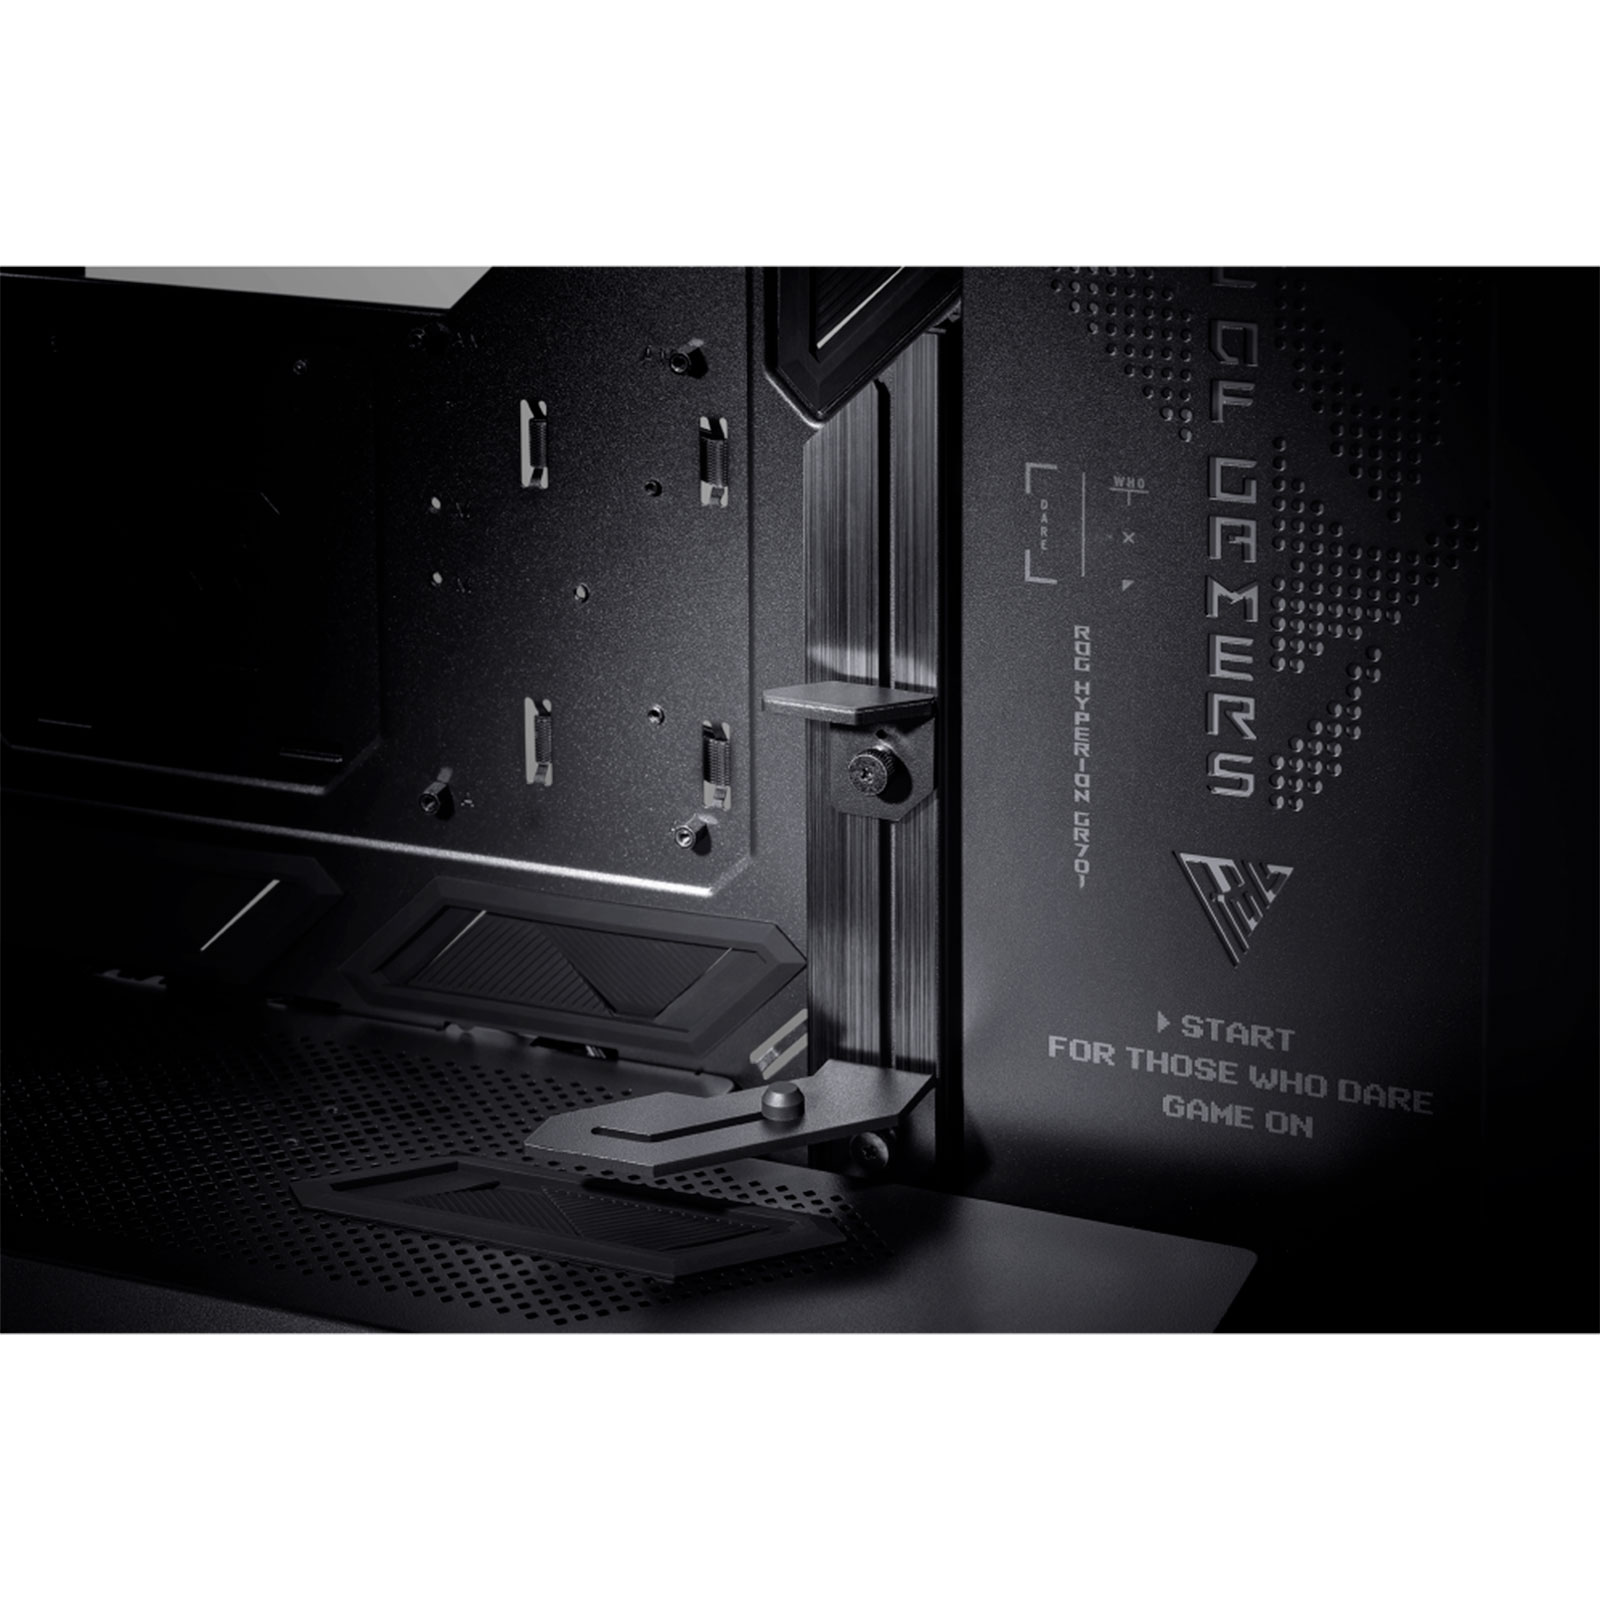 Huge ISSUE with the PC Case ASUS ROG Hyperion ! 